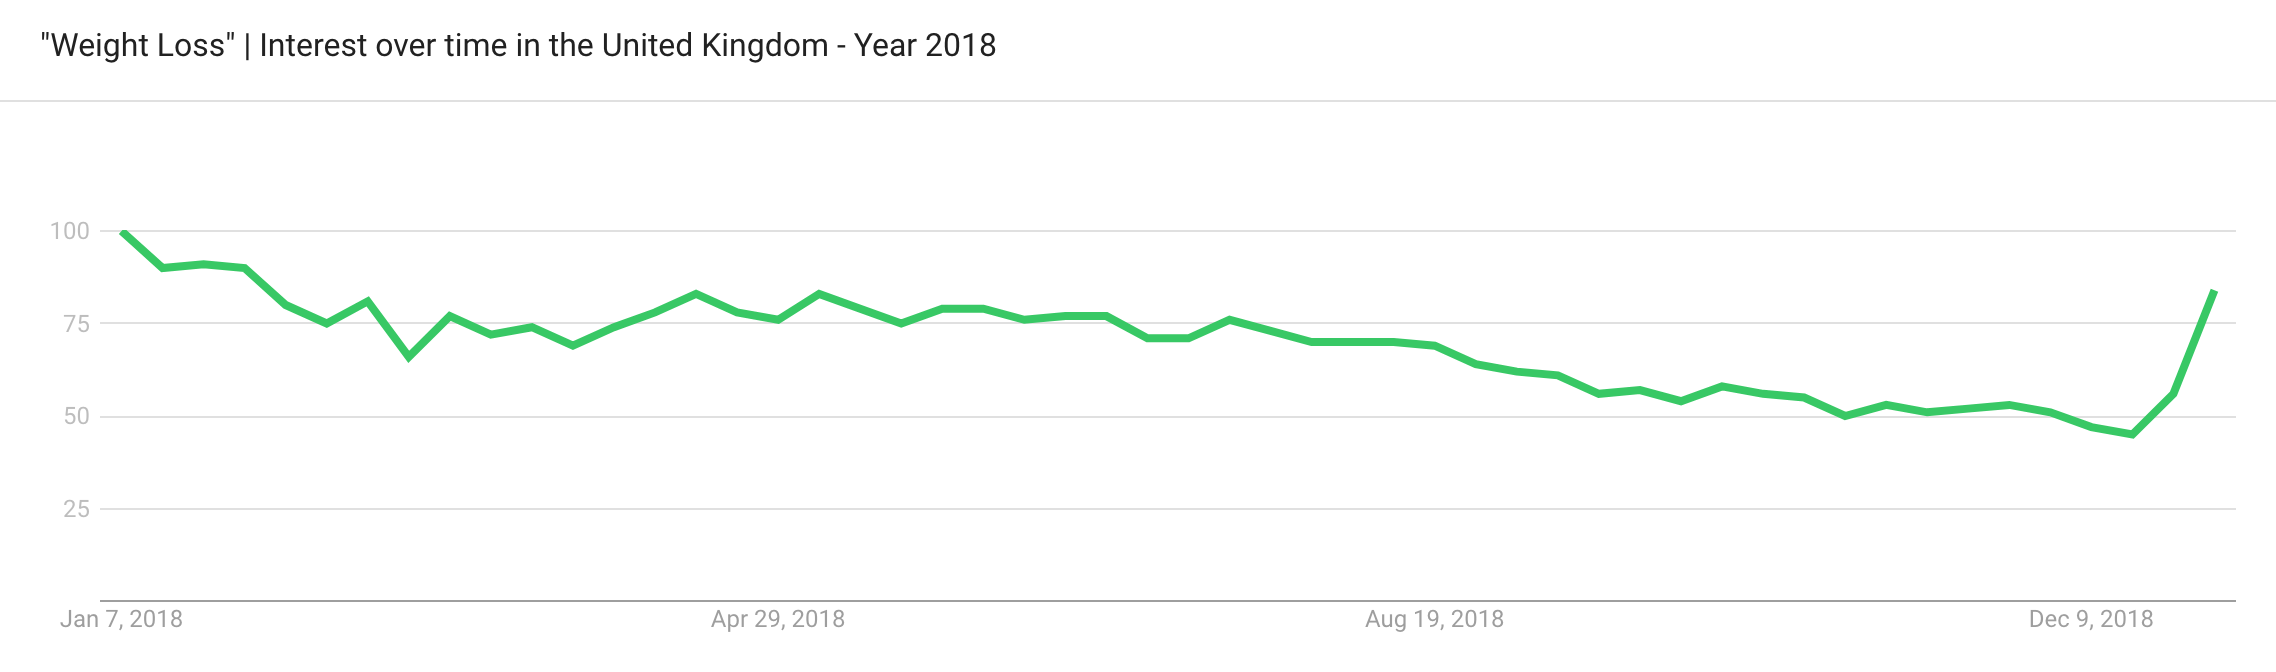 Google searches for ‘Weight Loss’ topic in the United Kingdom in 2018.